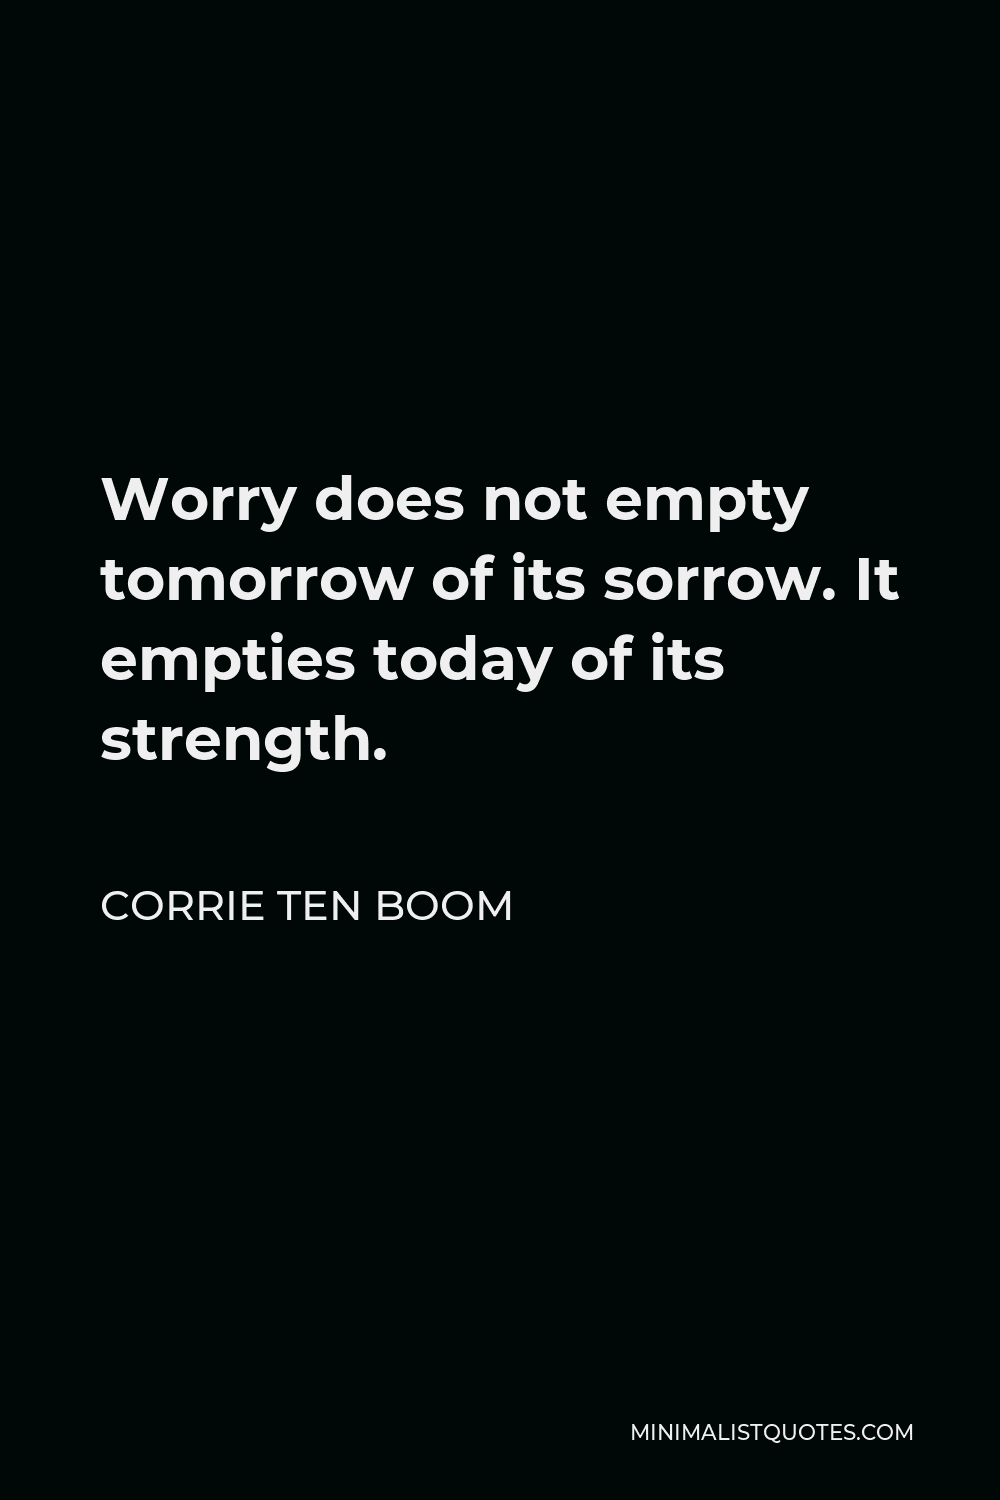 Corrie ten Boom Quote: Worry does not empty tomorrow of its sorrow